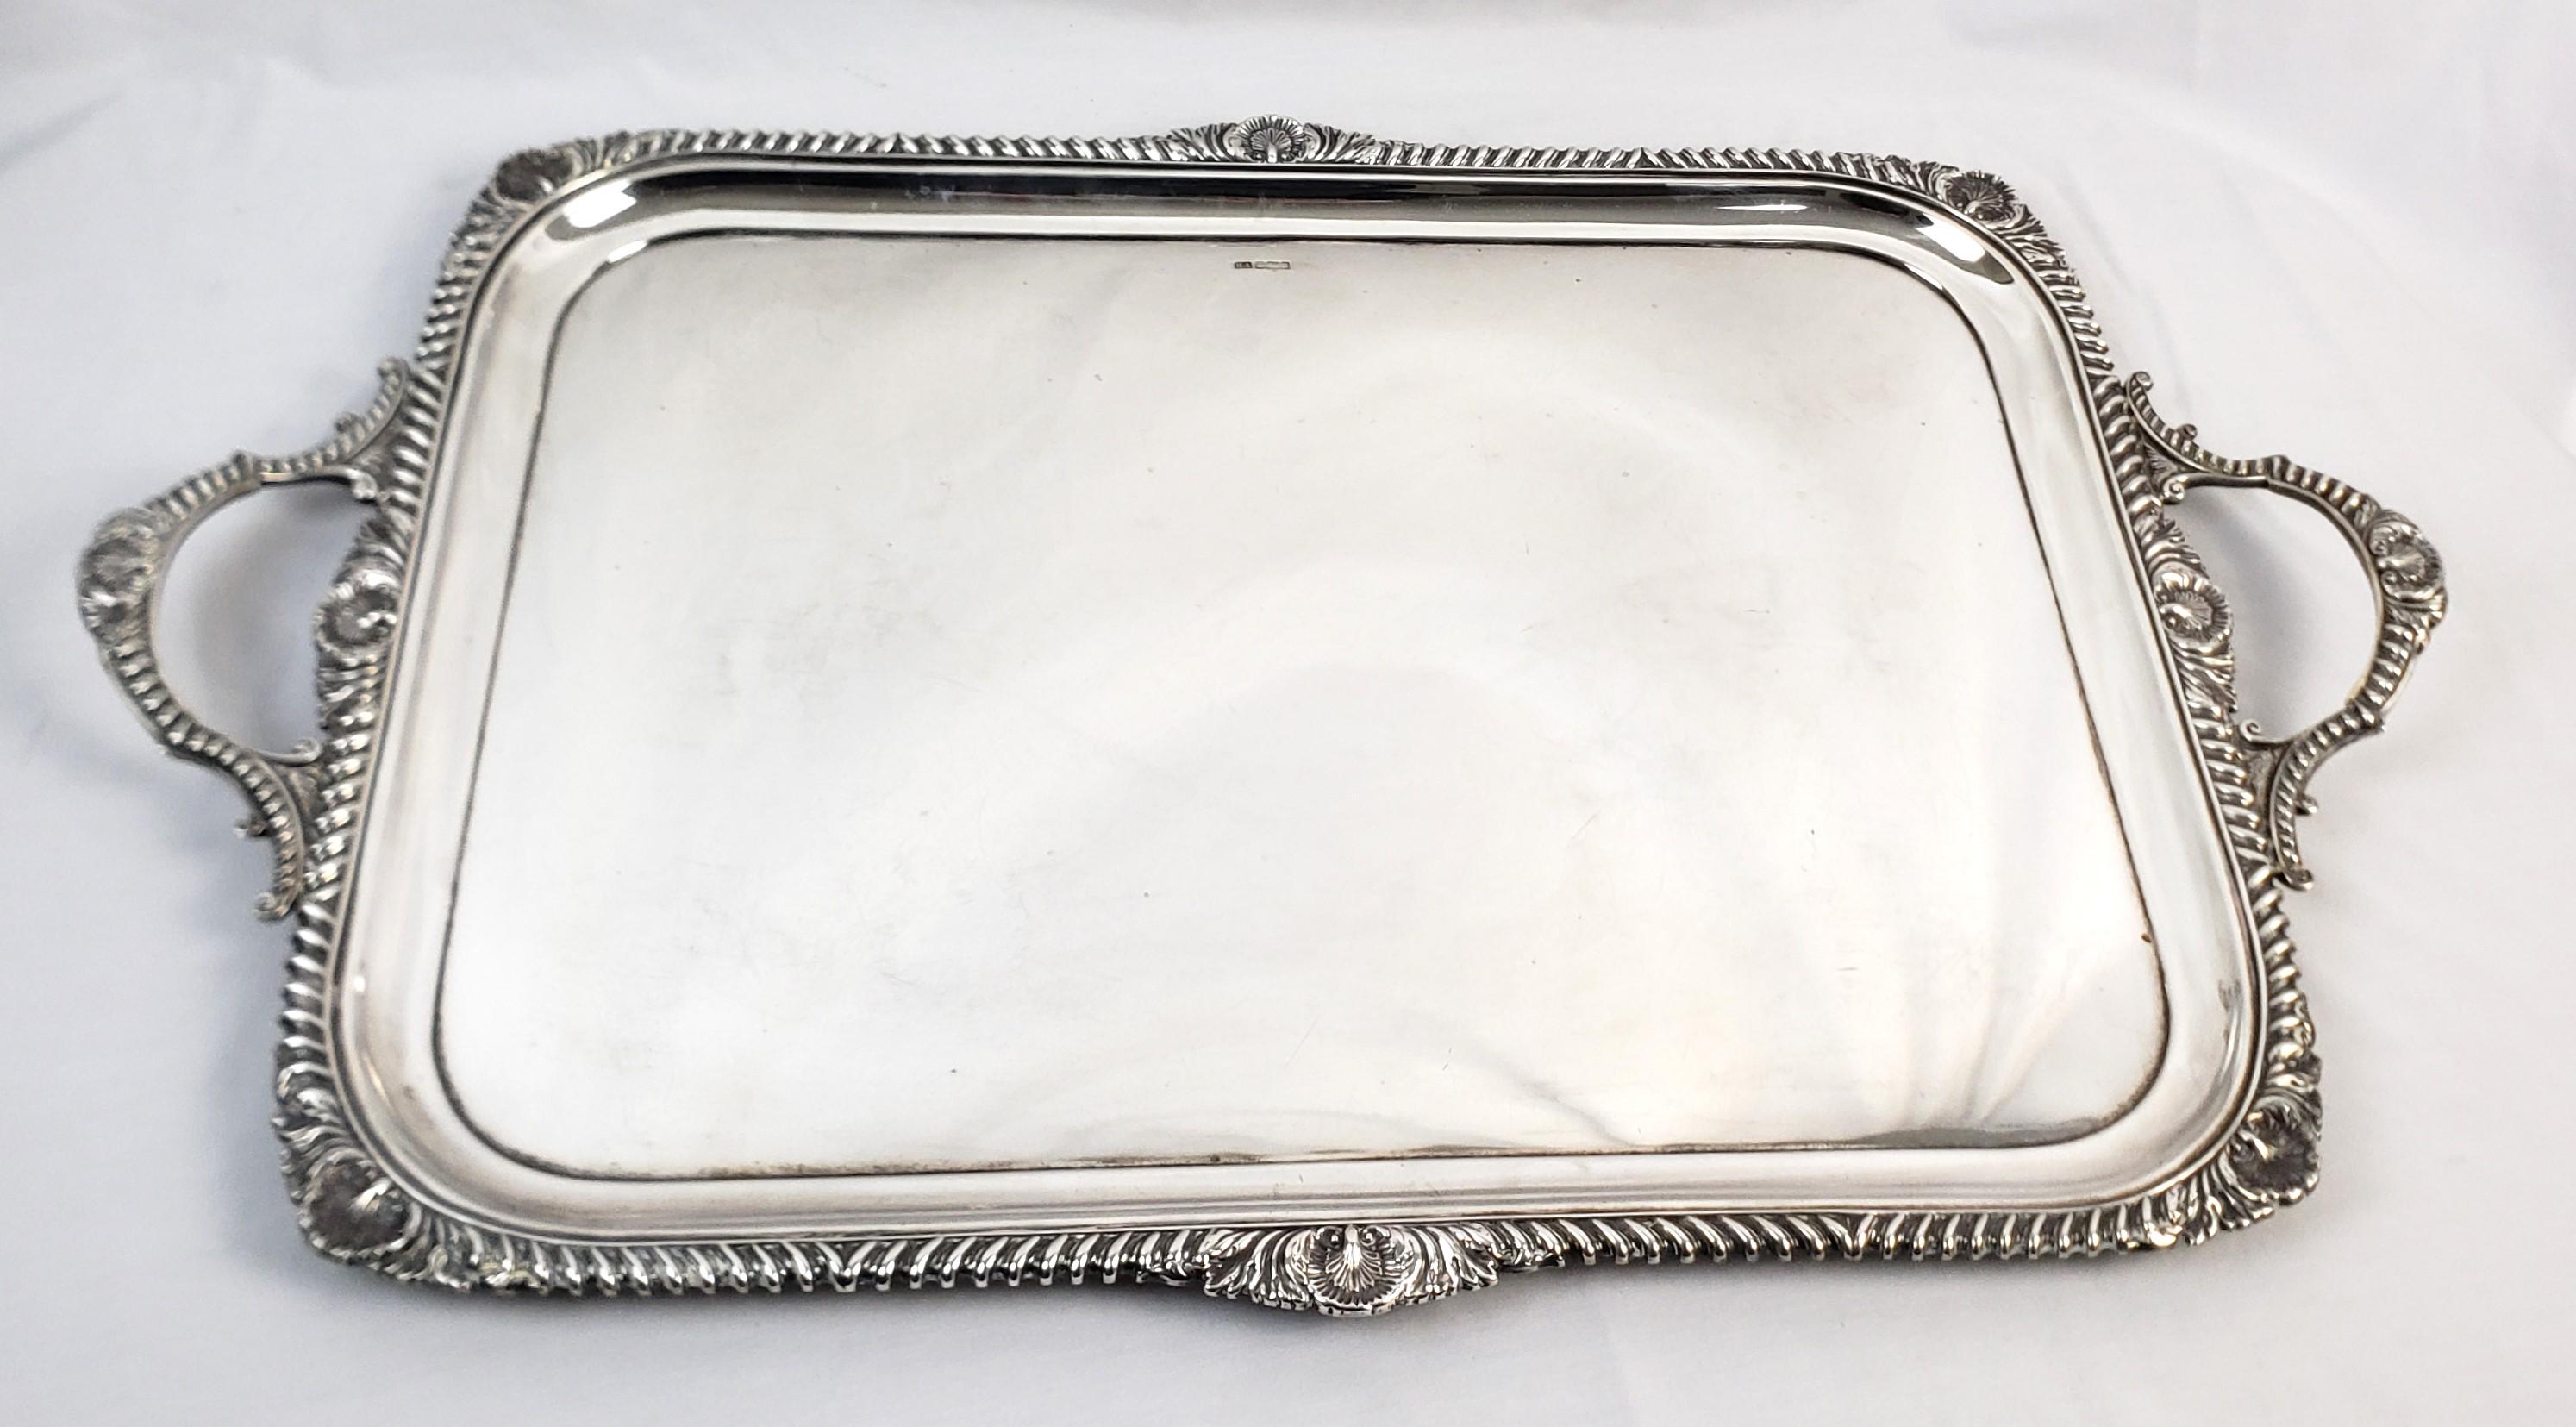 Hand-Crafted Large Antique Sterling Silver Edwardian Serving Tray with Stylized Rope Border For Sale